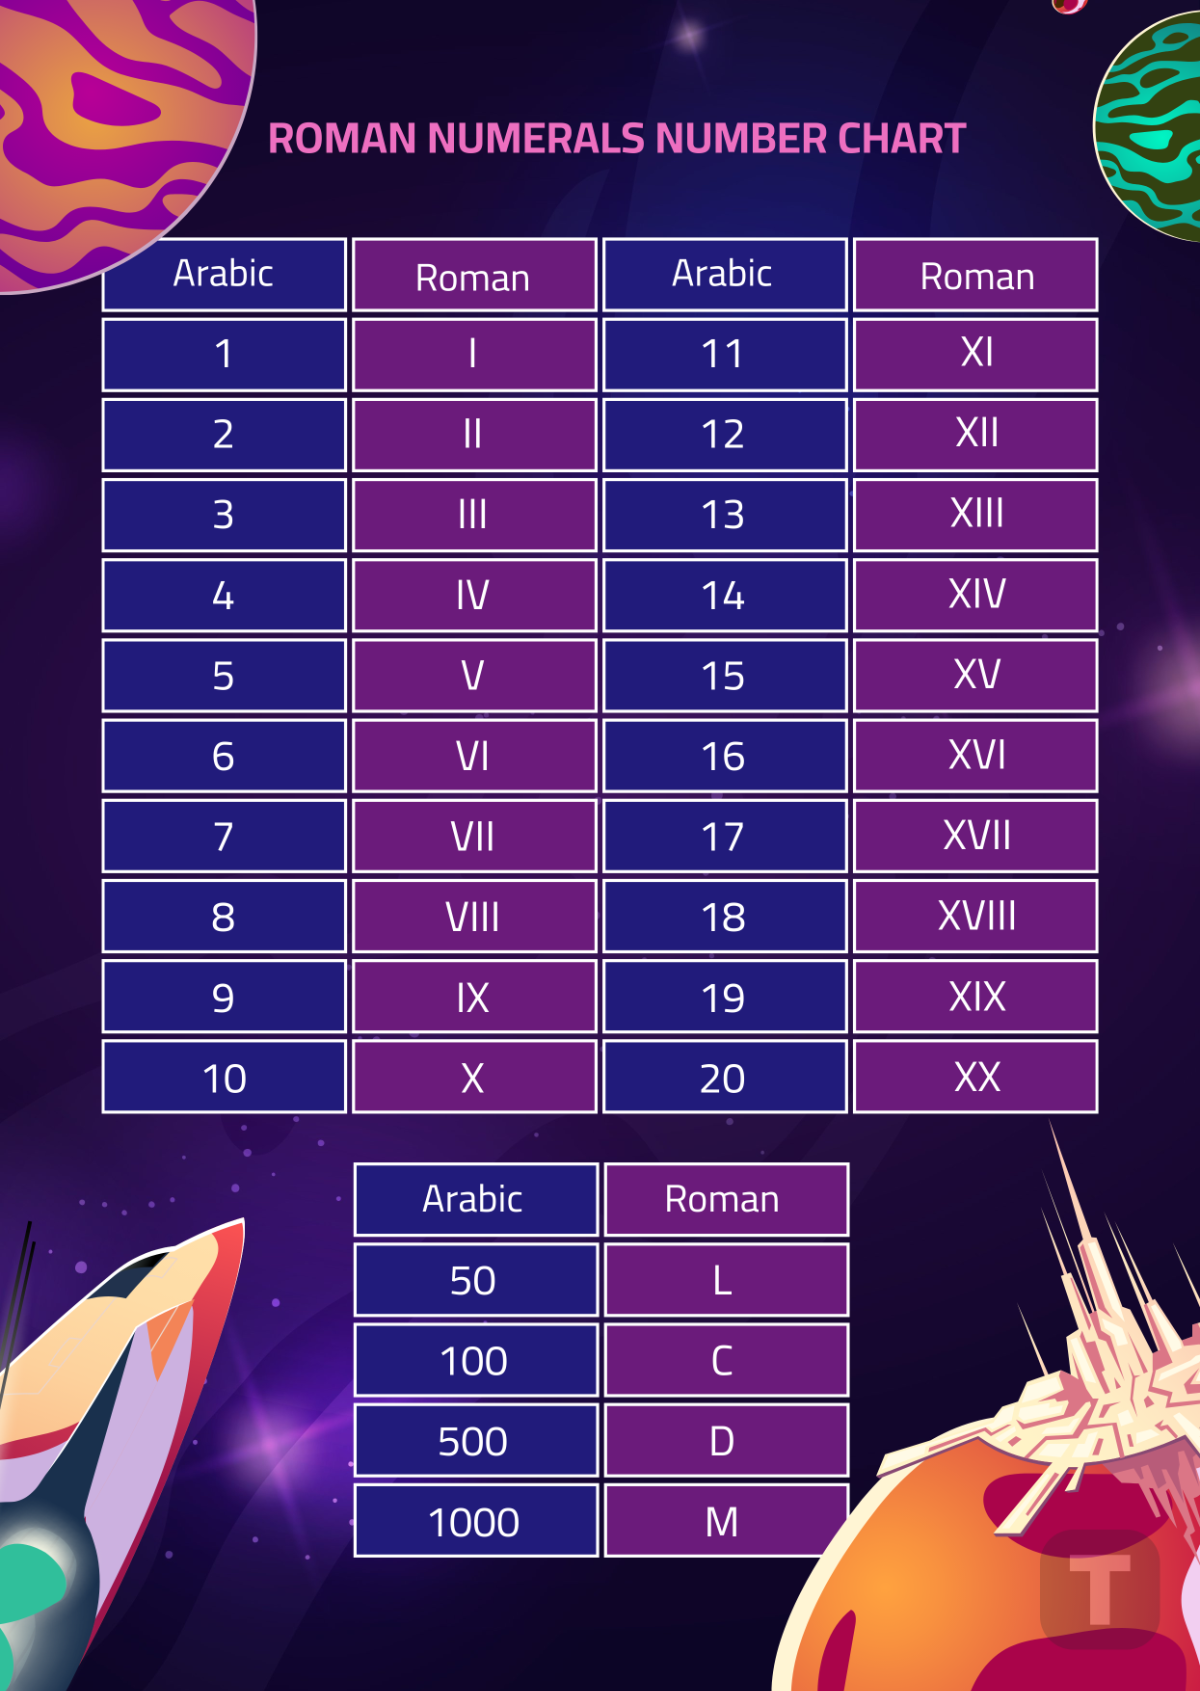 Roman Numerals Number Chart